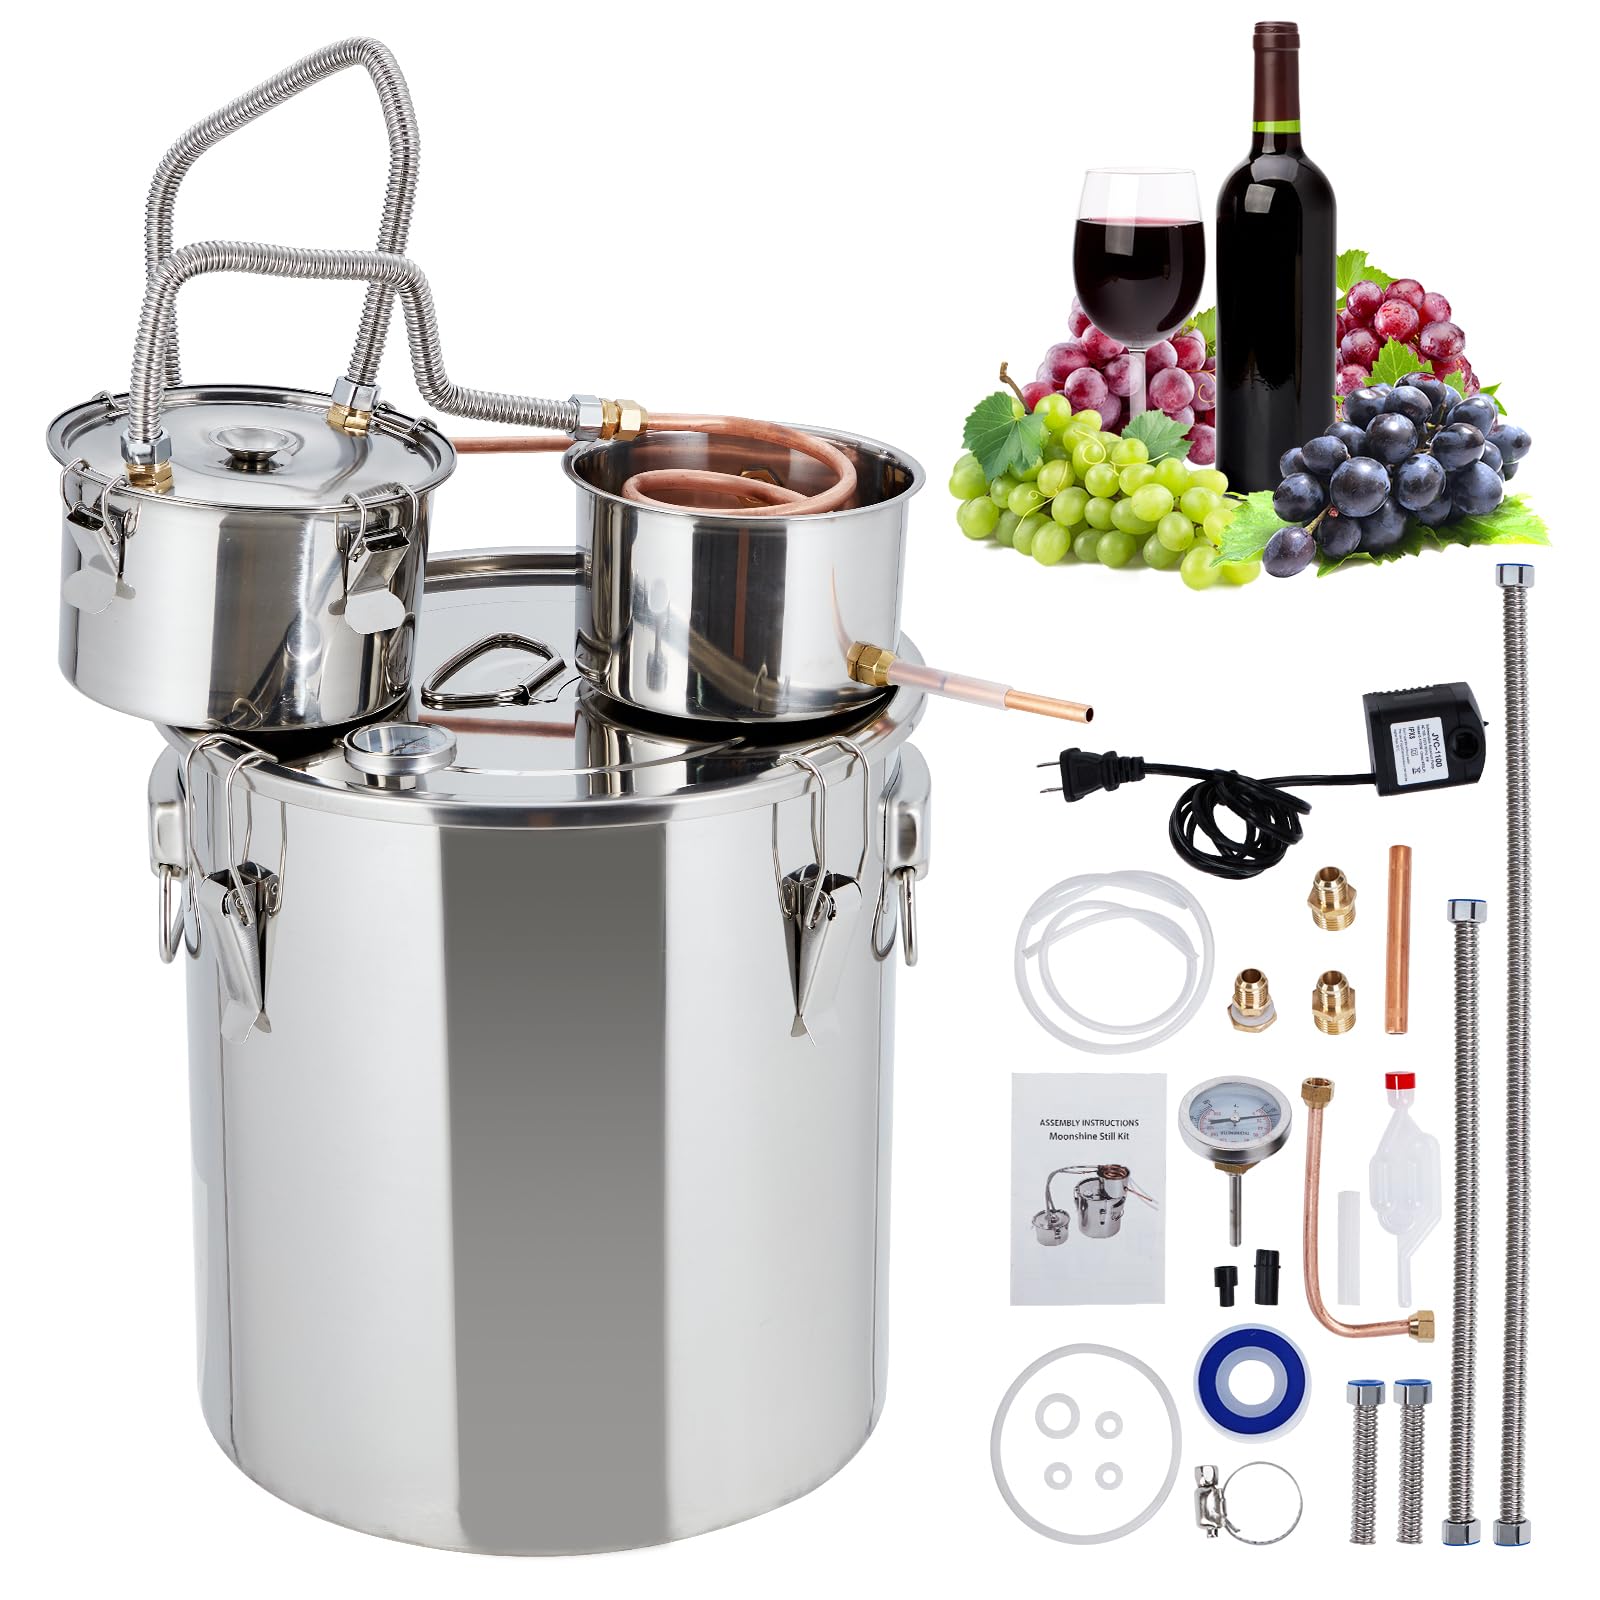 Alcohol Still 10Gal/38L Alcohol Distiller Stainless Steel Distillery Kit for Alcohol With Copper Tube Water Pump Build-in Thermometer, Home Brewing Kit for DIY Whisky Wine Brandy Making